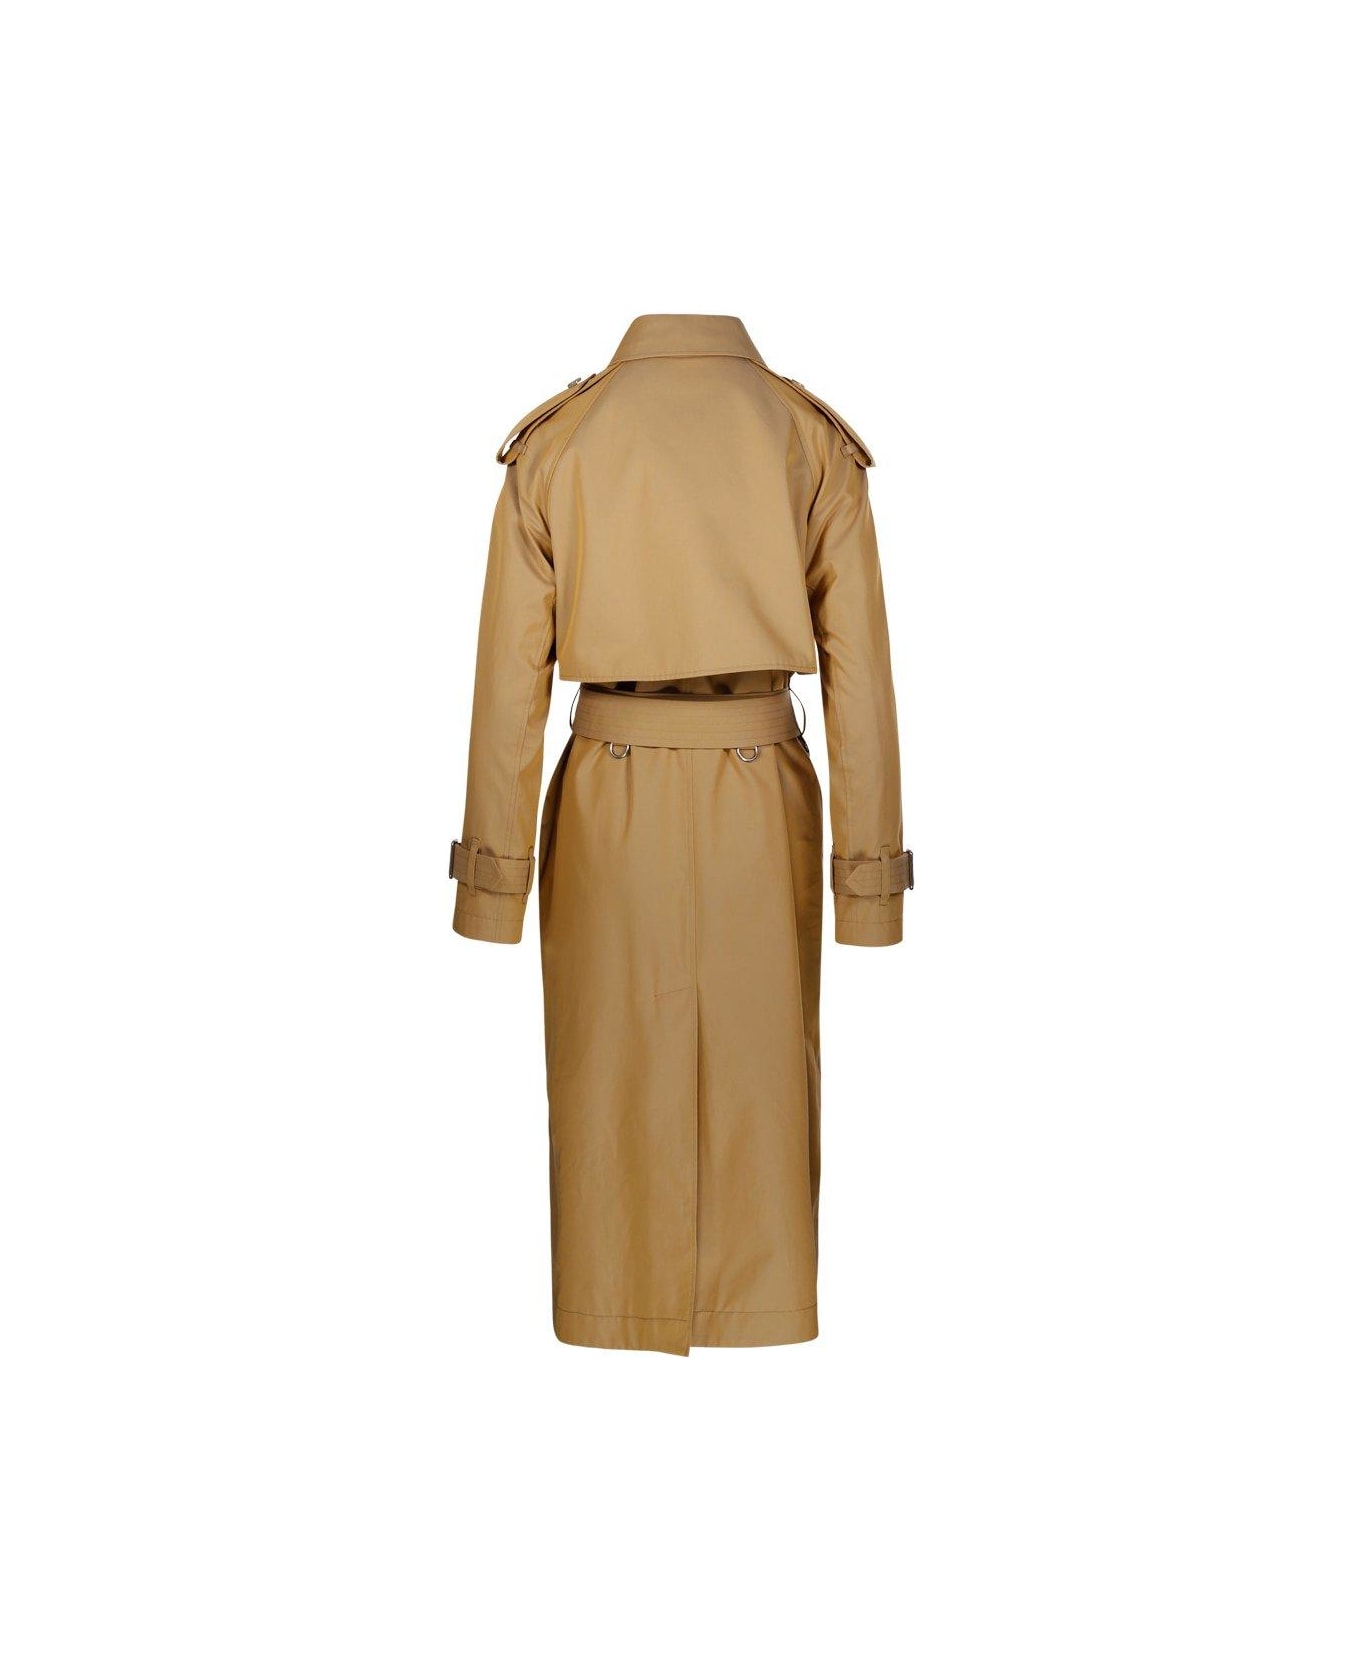 Burberry Kensington Heritage Double Breasted Belted Trench Coat - Beige